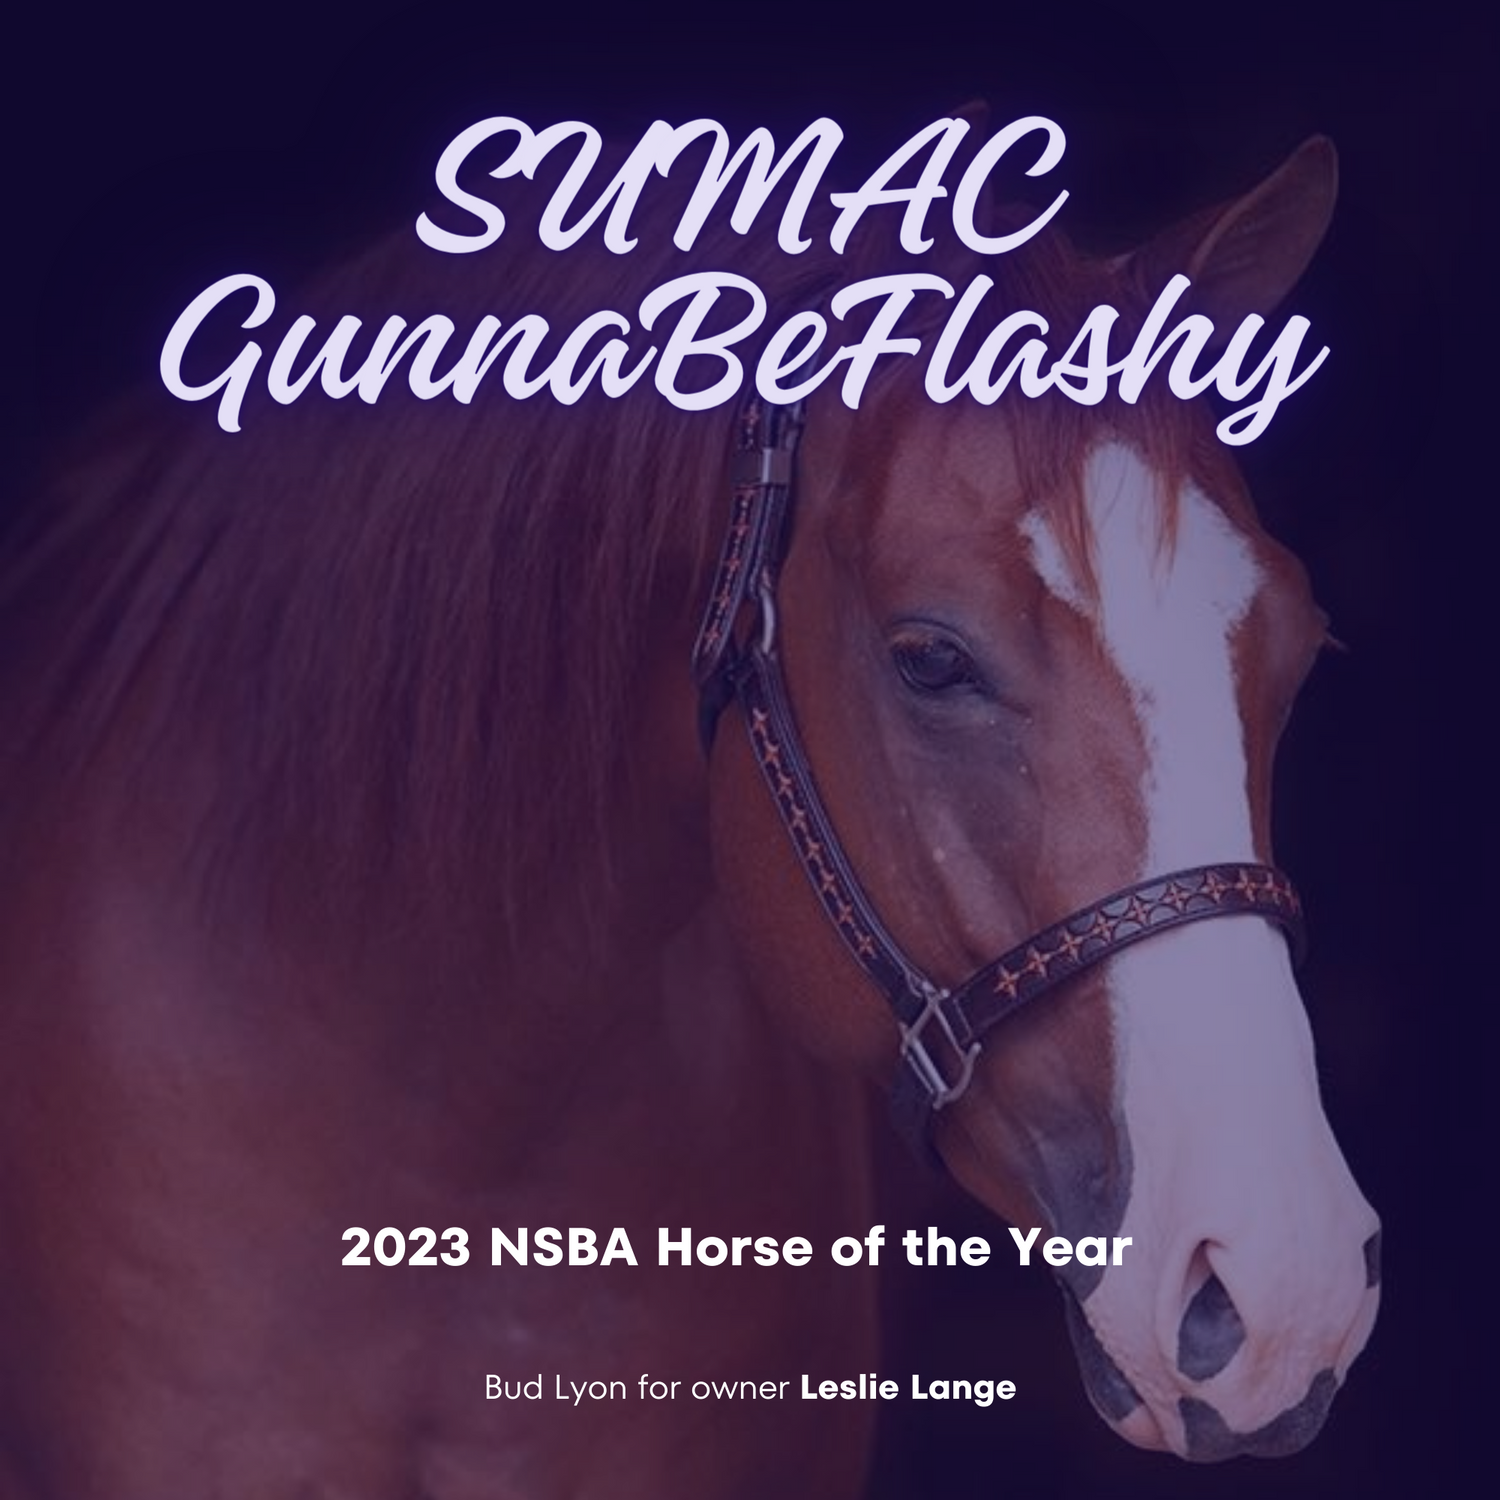 Romeo and Bud Lyon captured the 2023 AQHA Senior Ranch Riding World title and the 2023 NSBA Open Horse of the Year award.